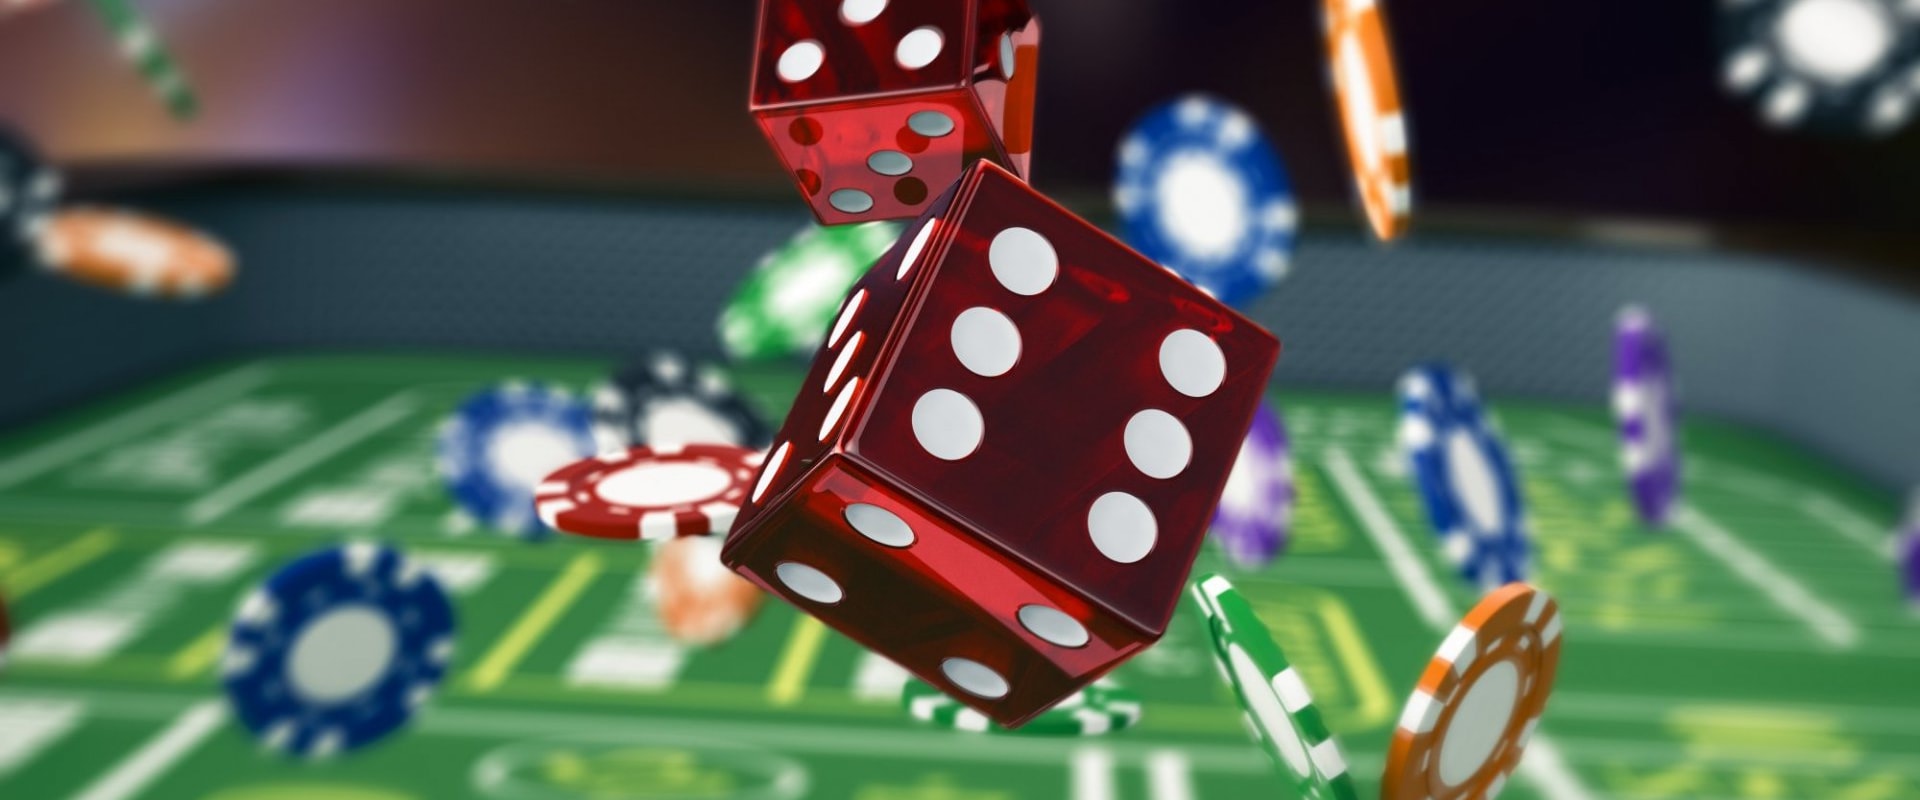 Where to Find the Best Online Gambling Sites?